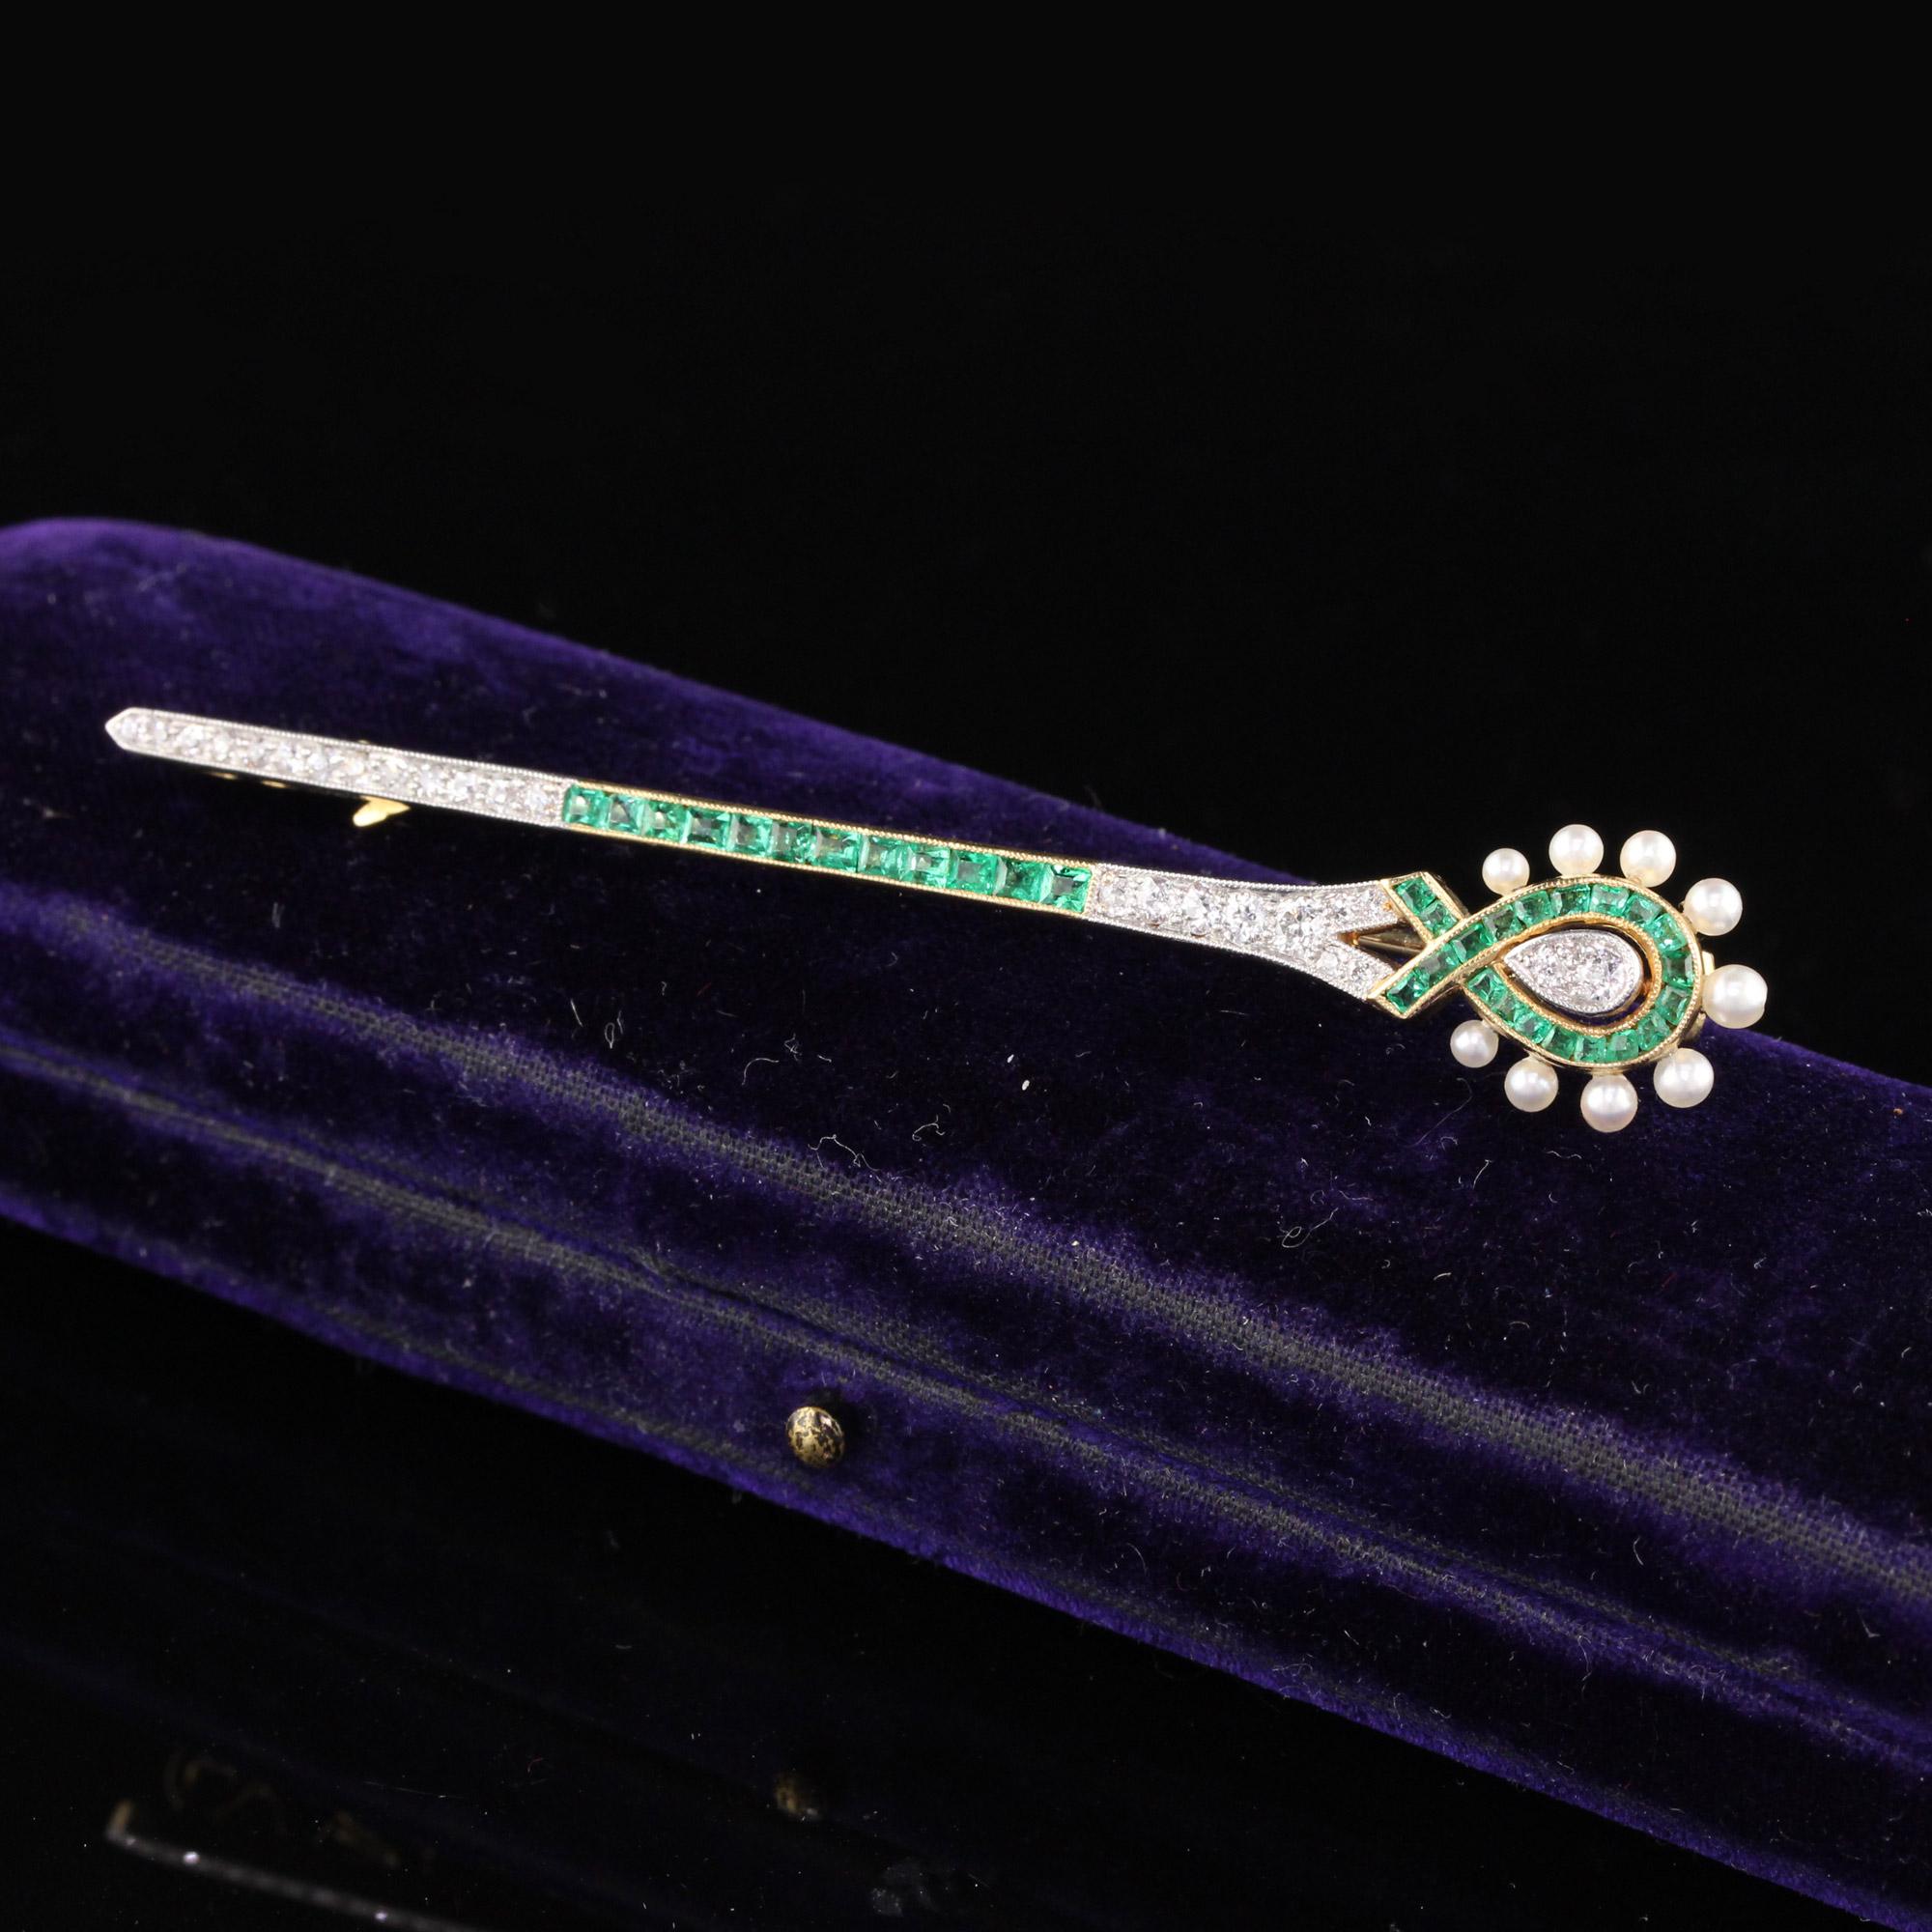 This is a remarkable art deco brooch in excellent condition. Made with calibrated cut emeralds and beautiful diamonds set in gold with a platinum top.

Metal: 18K yellow gold and platinum top

Weight: 7 Grams

Diamond Weight: Approximately 0.50